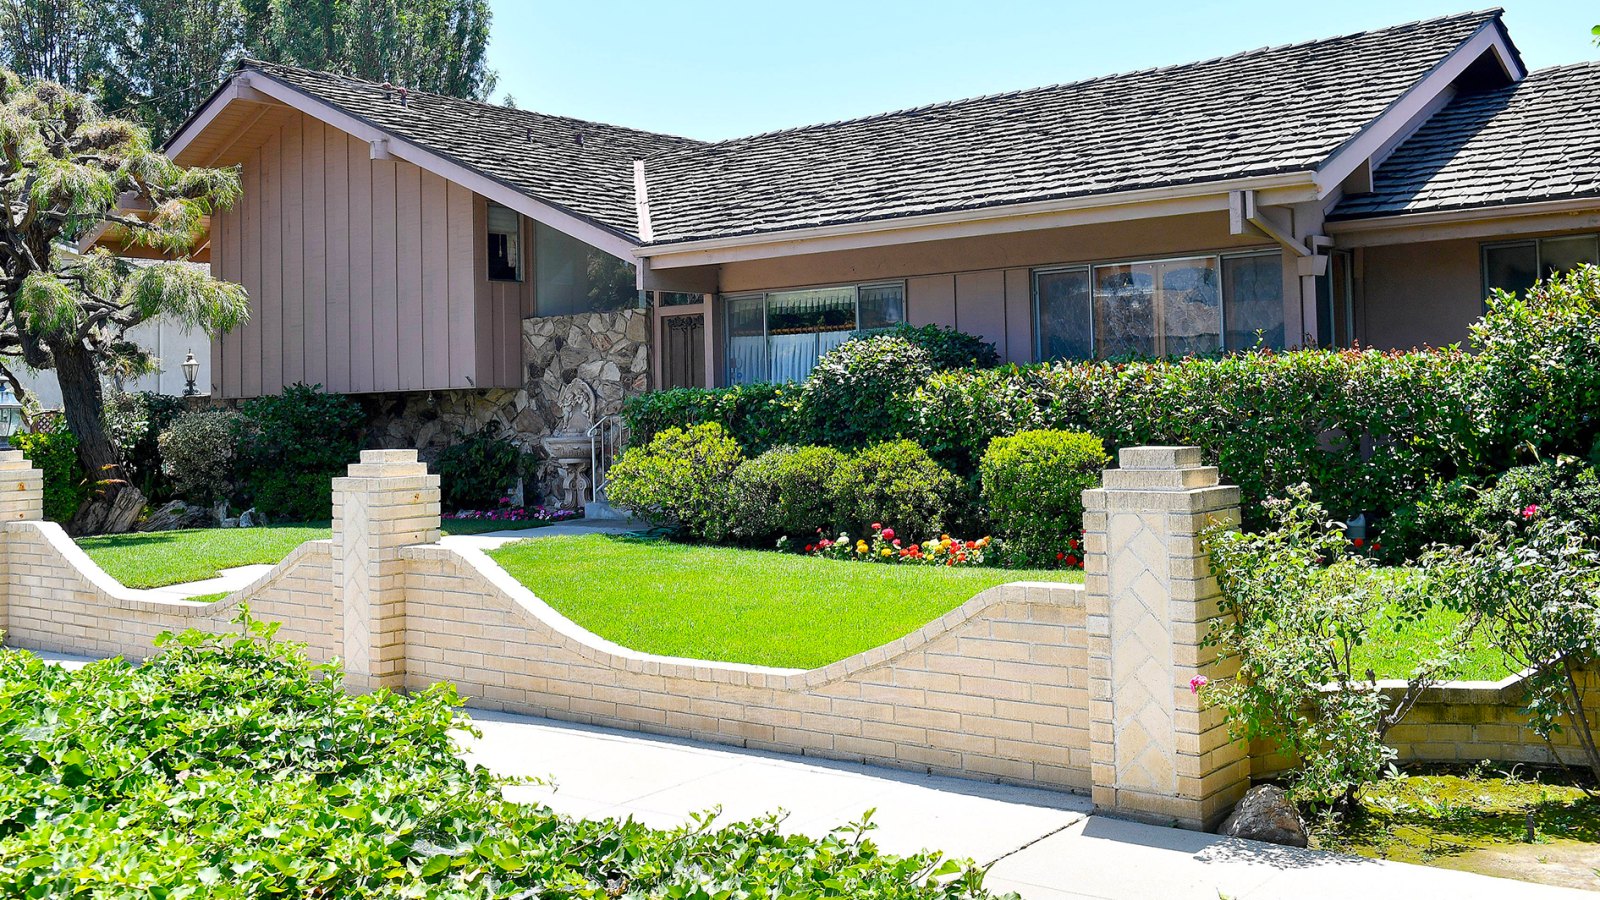 The iconic Brady Bunch home hits the market for the first time in 45 years for $1.9 million.